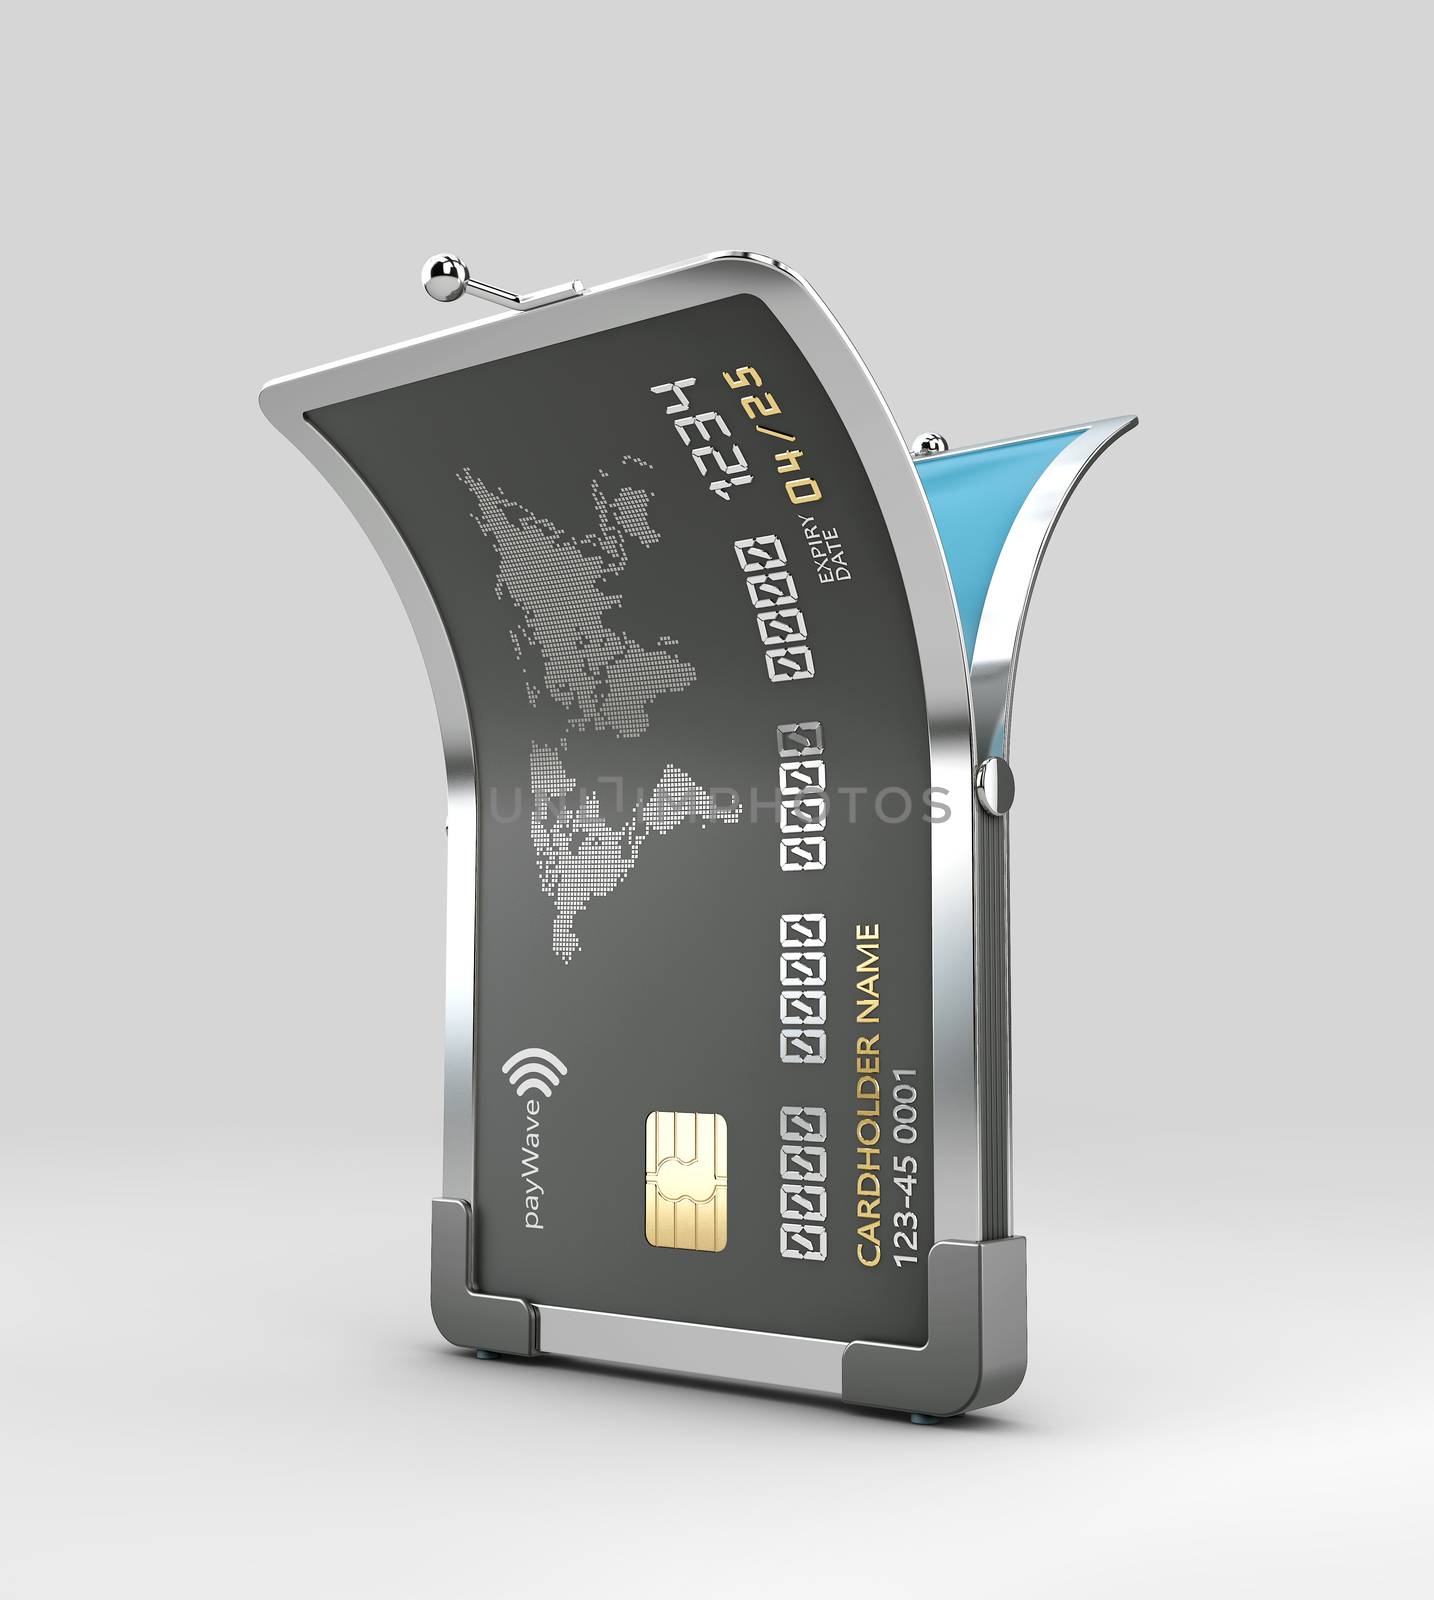 Open Credit card, clipping path included, 3d Rendering by tussik